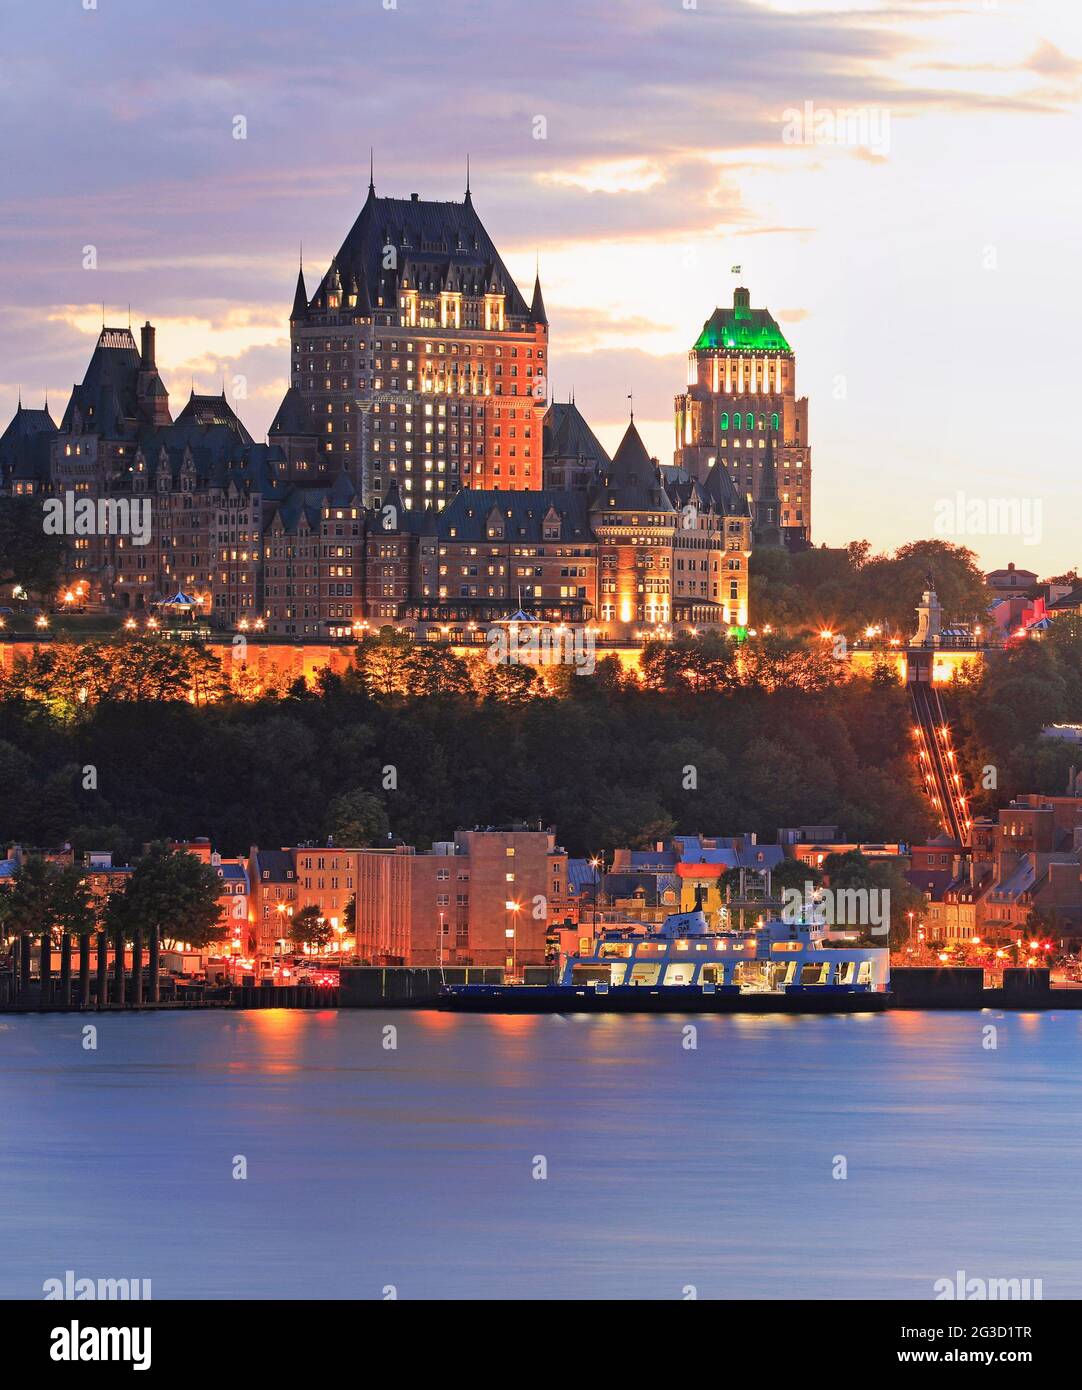 Quebec City skyline at dusk with Saint Lawrence River on the foreground Stock Photo